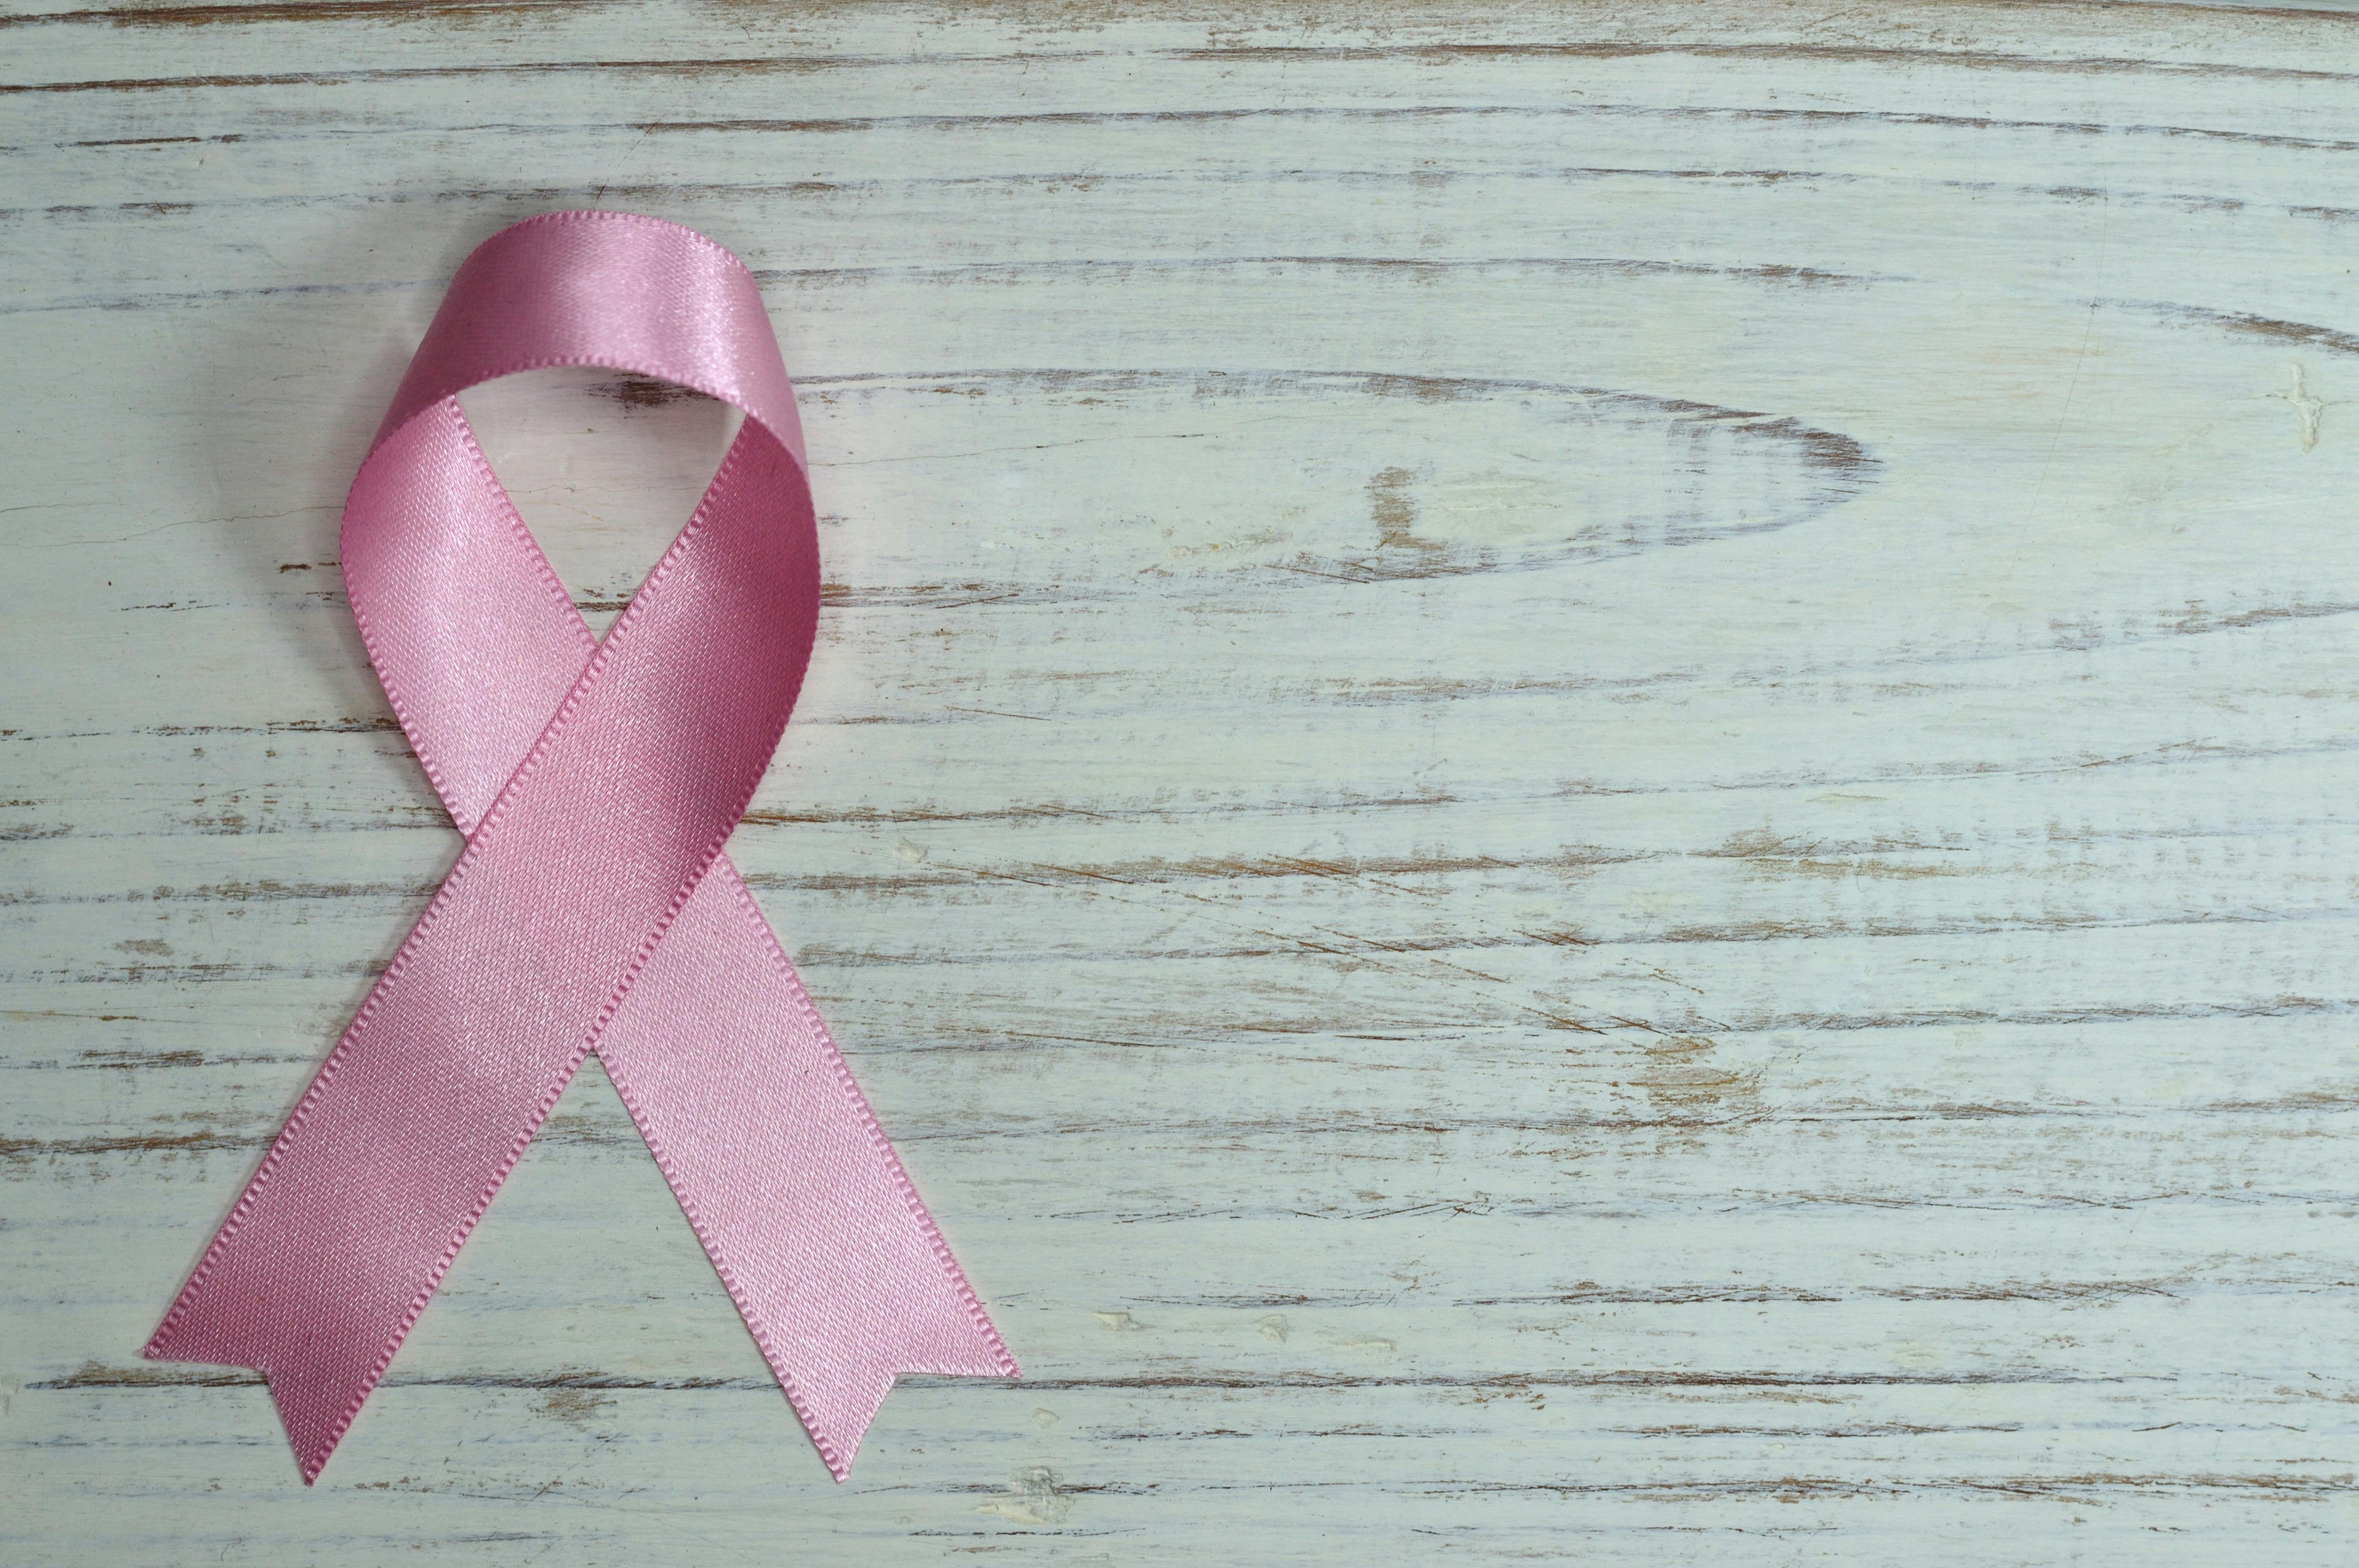 Pink Ribbons Of Breast Cancer Awareness On Free Stock Photo and